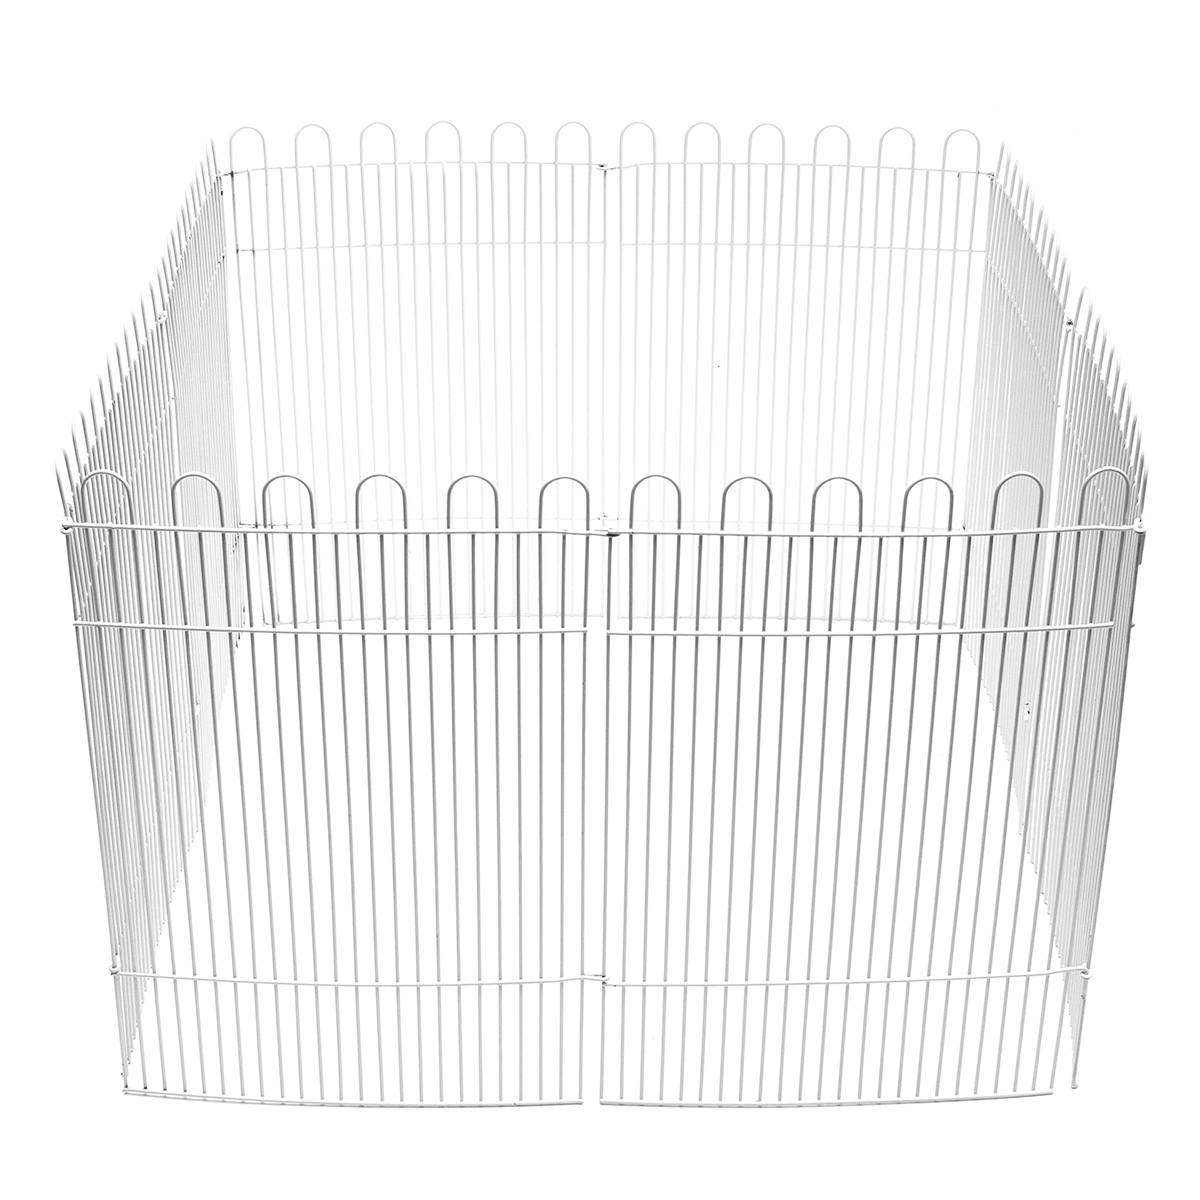 8 Panel Foldable Small Pet Fence Cage Free Activity Large Space Pet Playpen For Hamster Dog Cat Guinea Pig Hamster Fence Cage